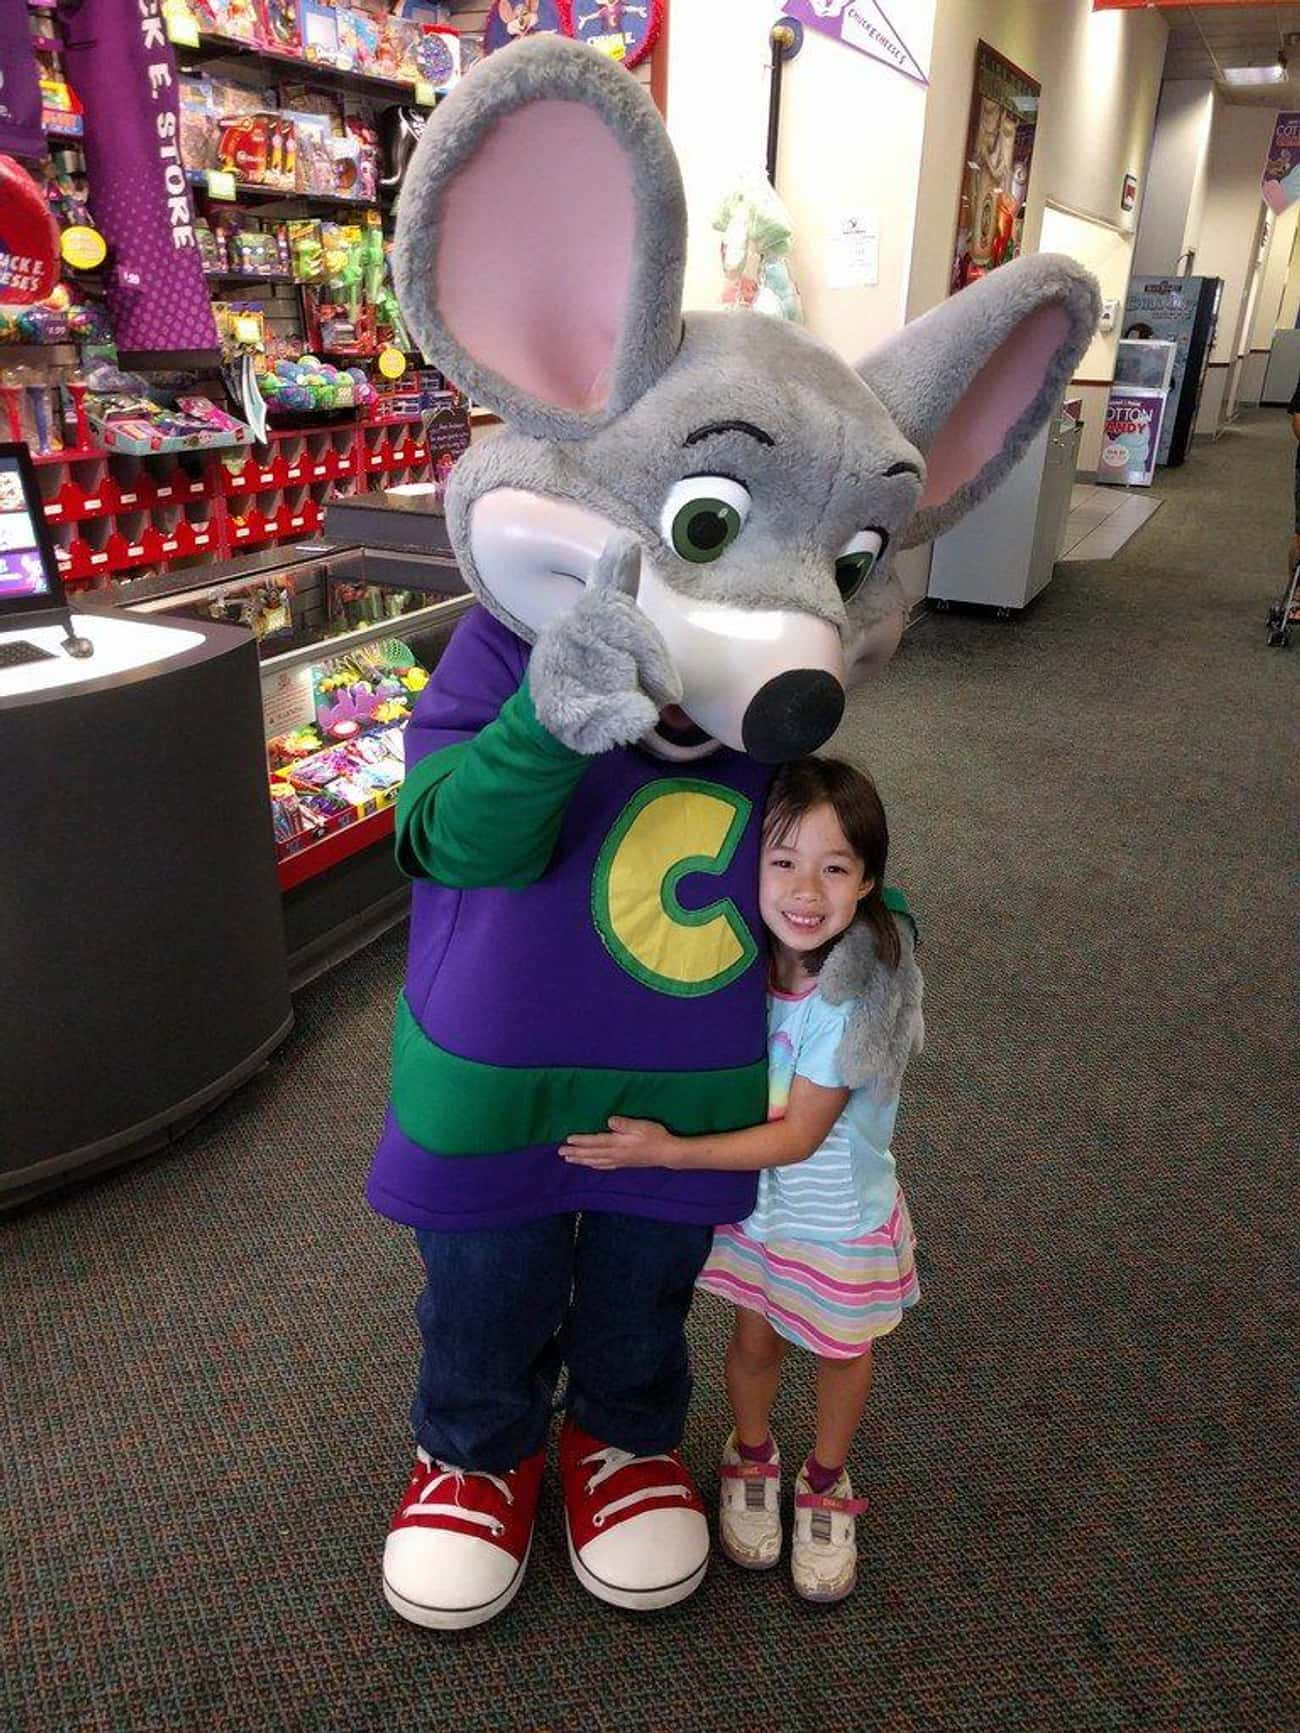 Bring the family together and make memories at Chuck E Cheese!